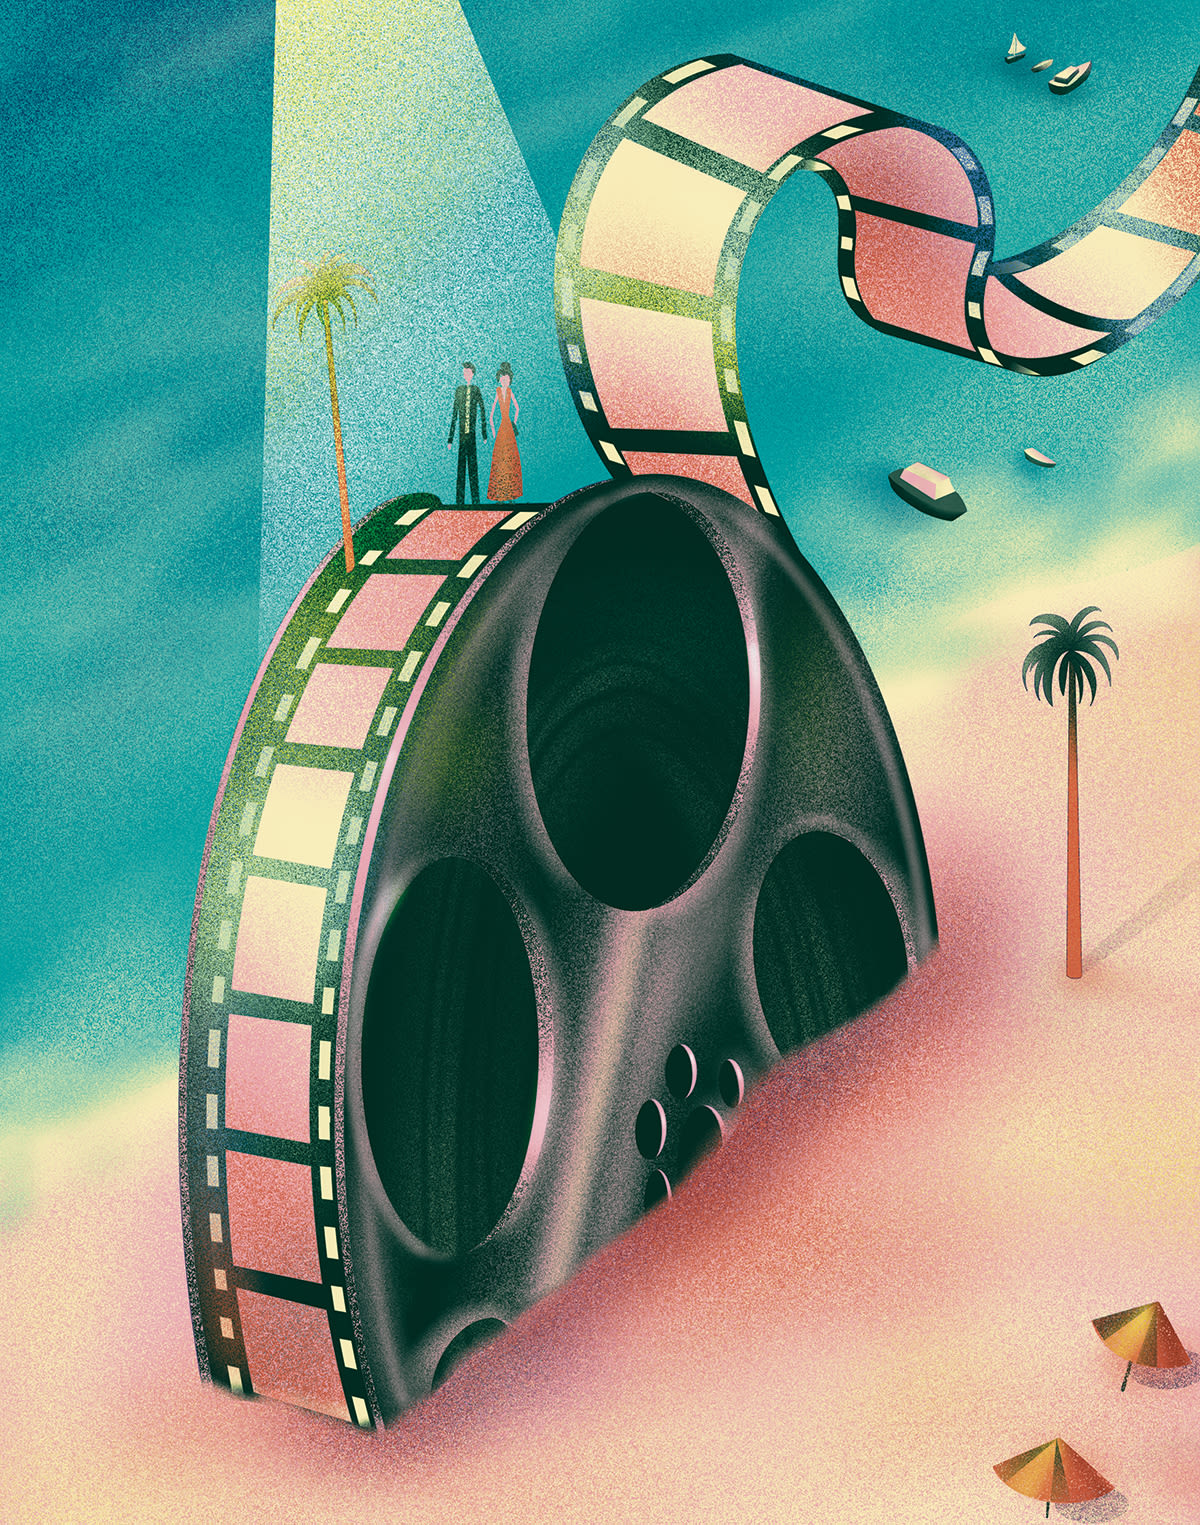 Will Cannes Rebound After Hollywood Strikes Overshadowed Last Year’s Market?